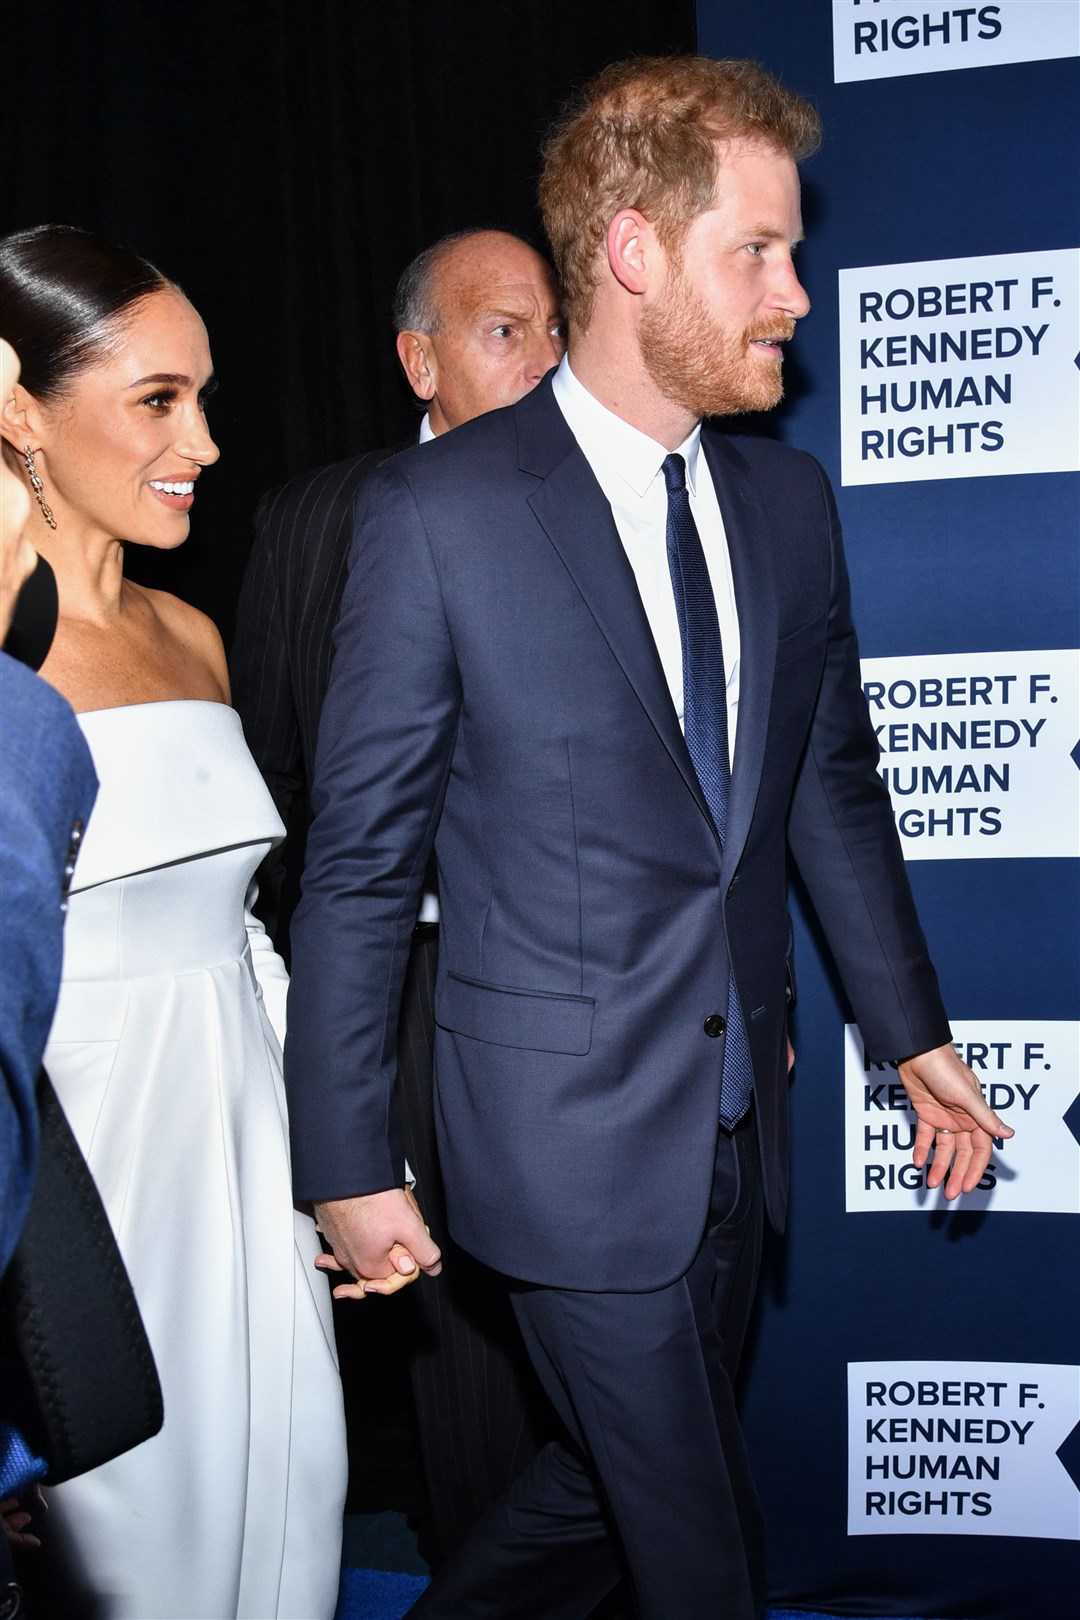 The Duke and Duchess of Sussex pictured as they arrive at the Robert F Kennedy Human Rights Ripple of Hope Awards Gala at the New York Hilton Midtown (PA)